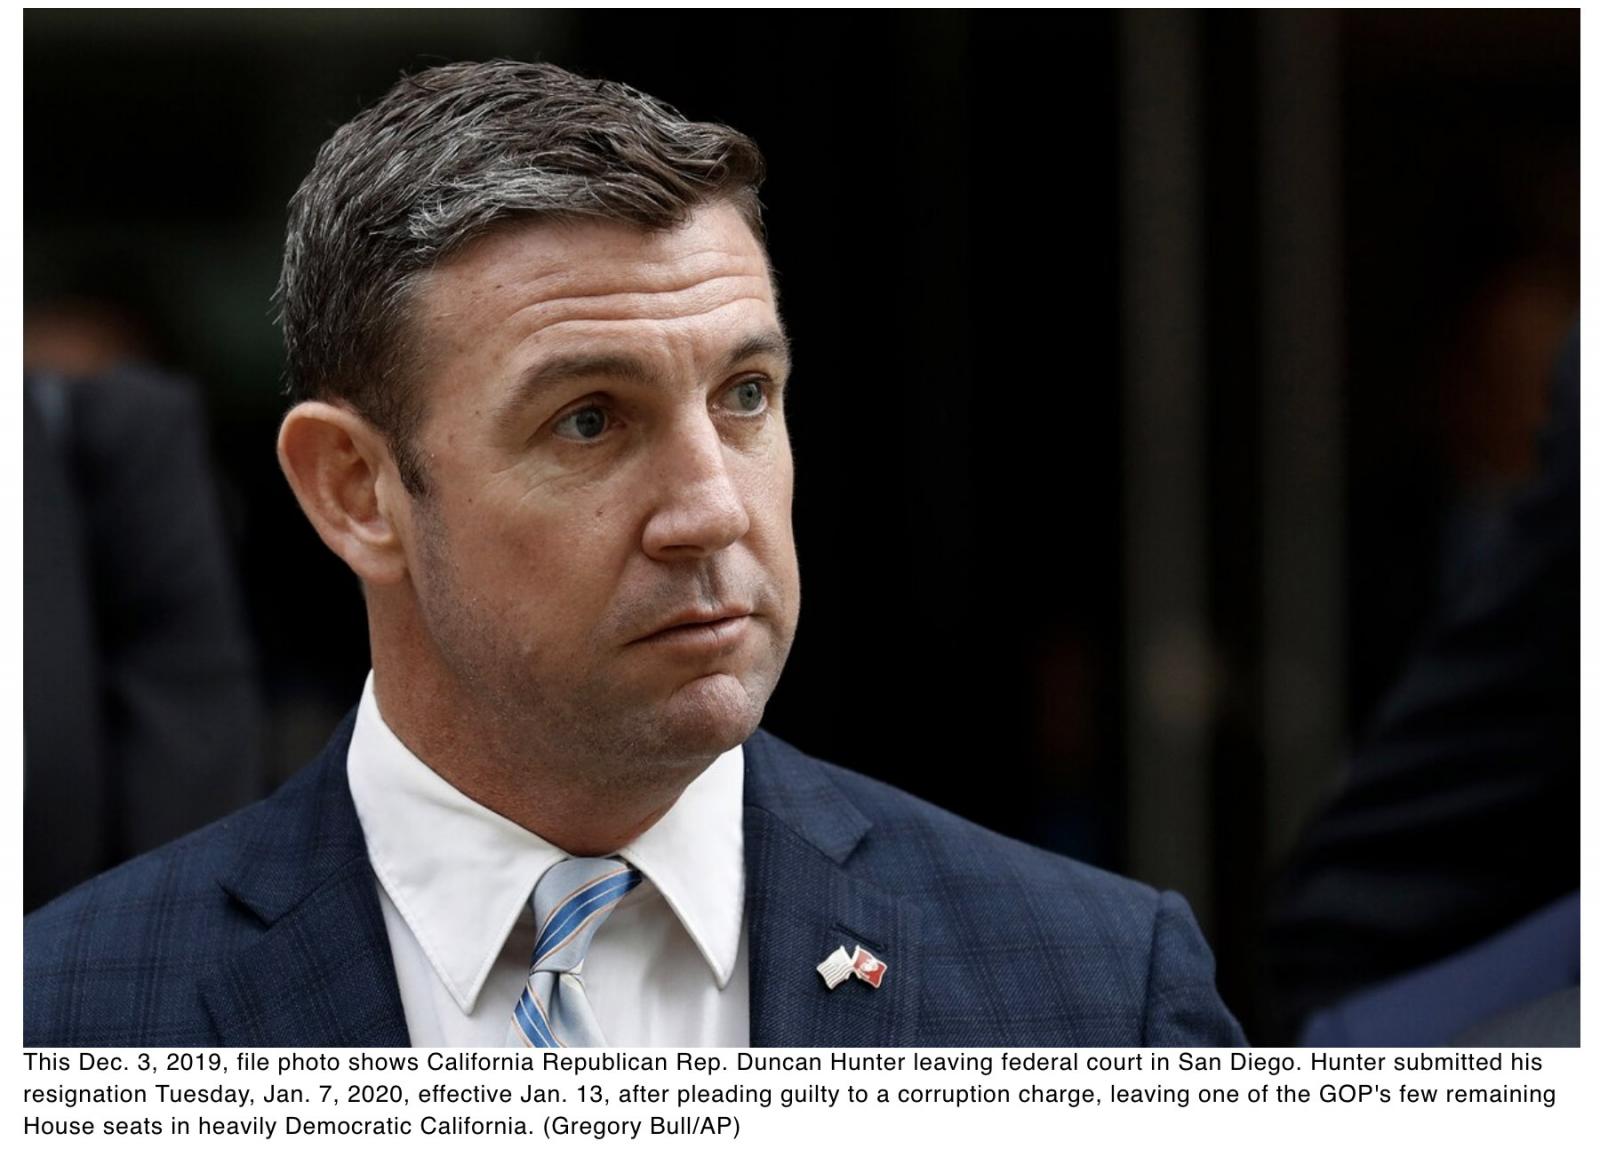  Marine vet Duncan Hunter resigns from Congress after corruption conviction